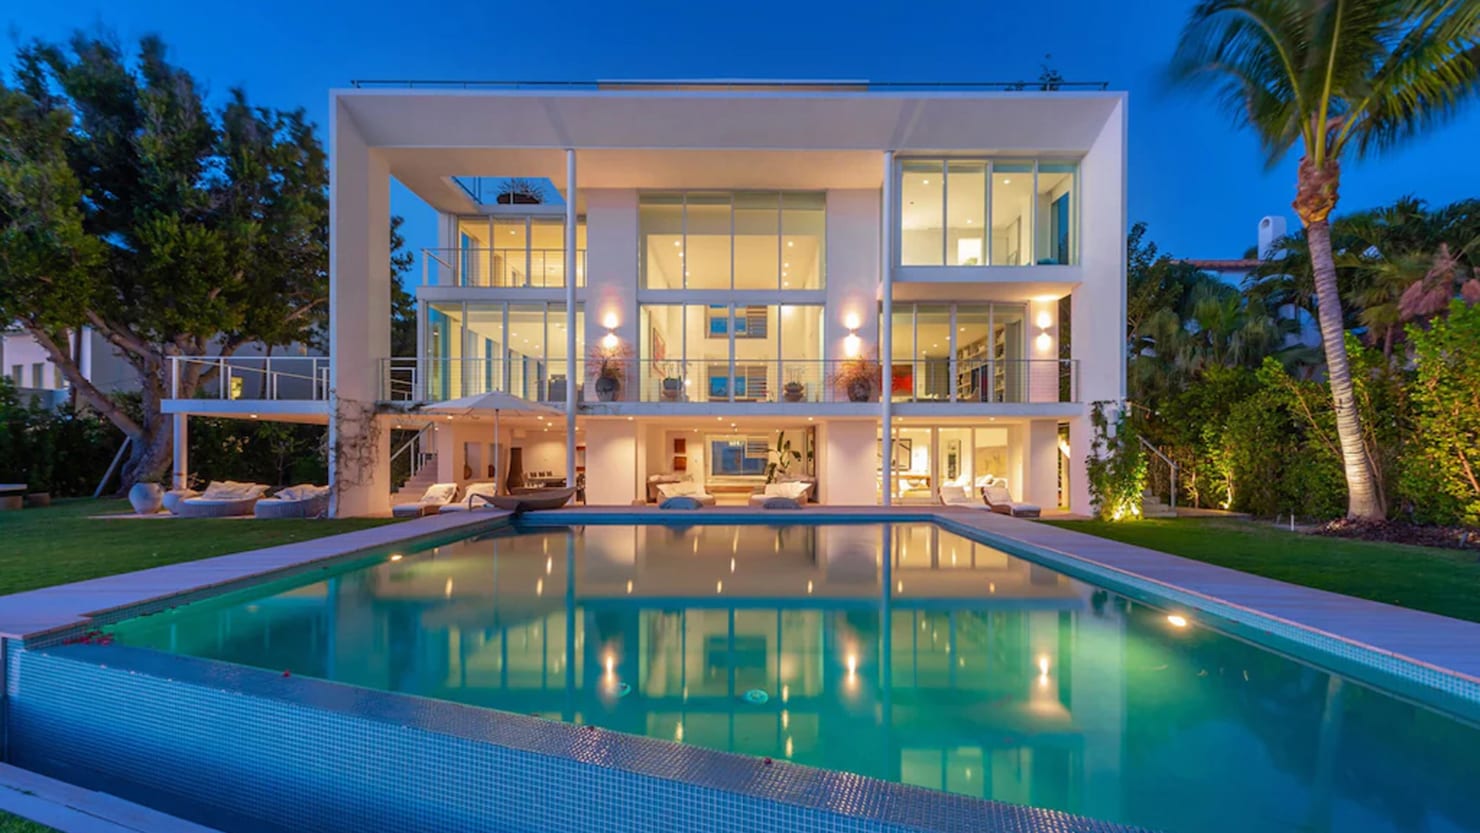 OMG, I Want to Rent That House: Key Biscayne, Florida